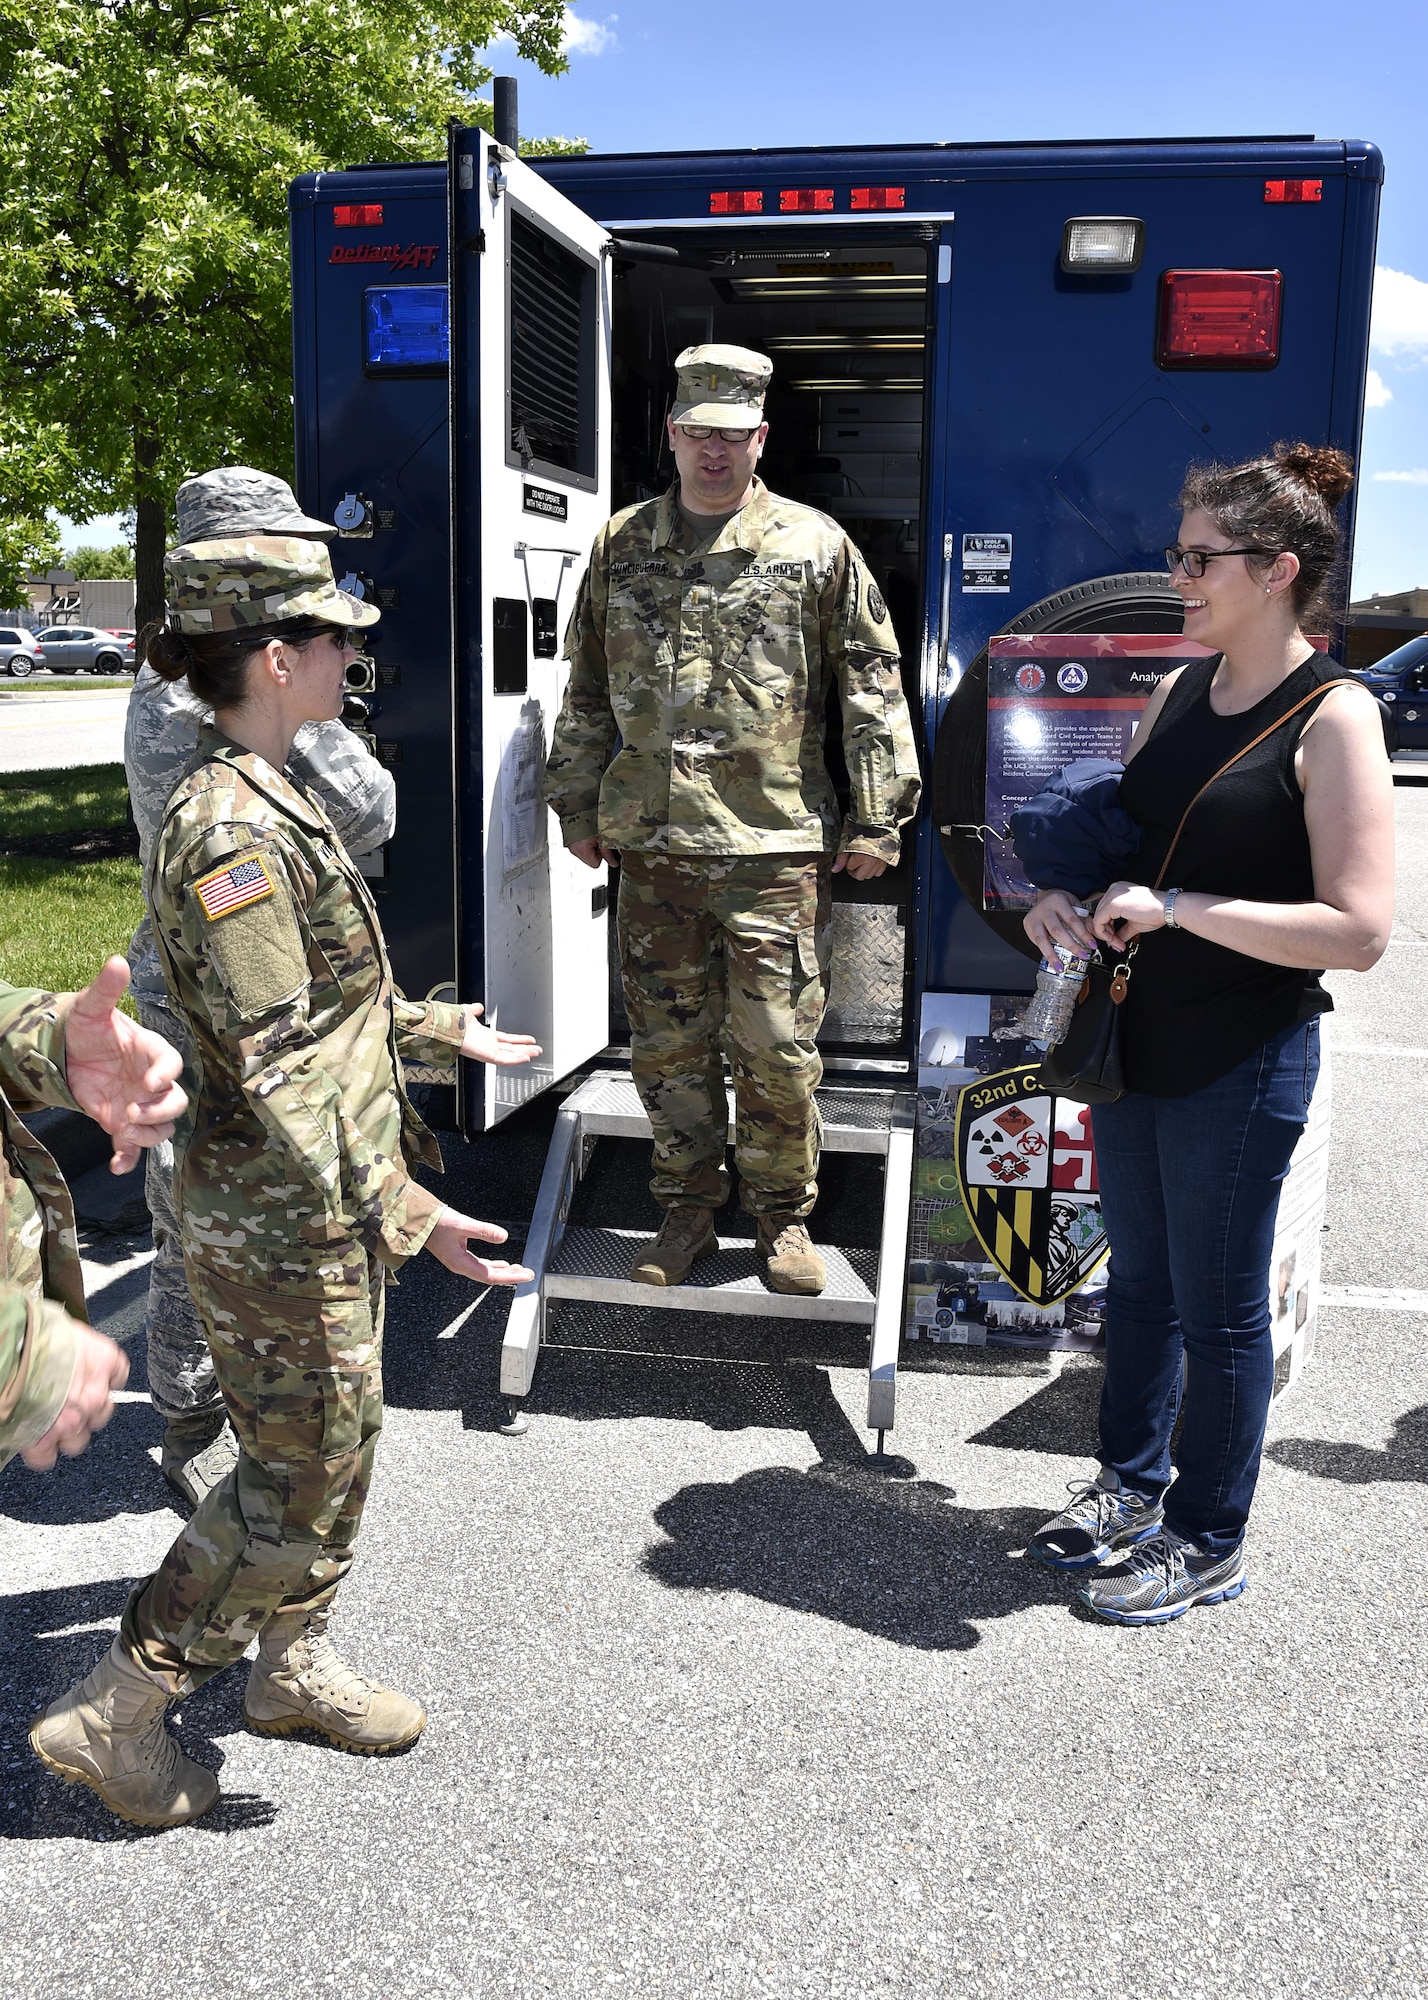 Service members speak to a member of the Office of Cost Assessment and Program Evaluation June 1, 2017, at Warfield Air National Guard Base, Md. (U.S. Air National Guard photo by Airman Sarah M. McClanahan /Released Master Sgt. Chris Schepers)